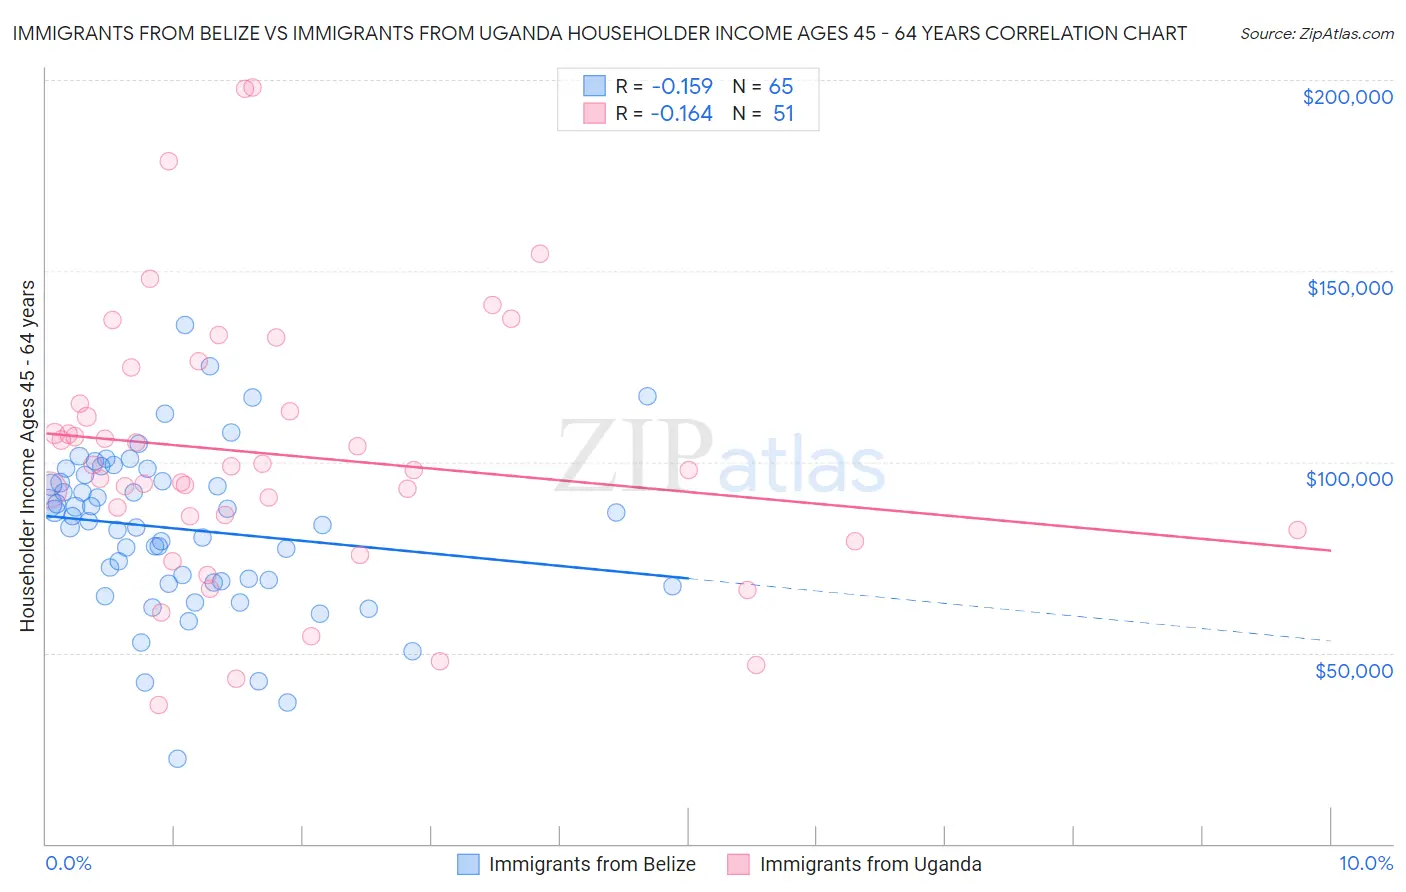 Immigrants from Belize vs Immigrants from Uganda Householder Income Ages 45 - 64 years